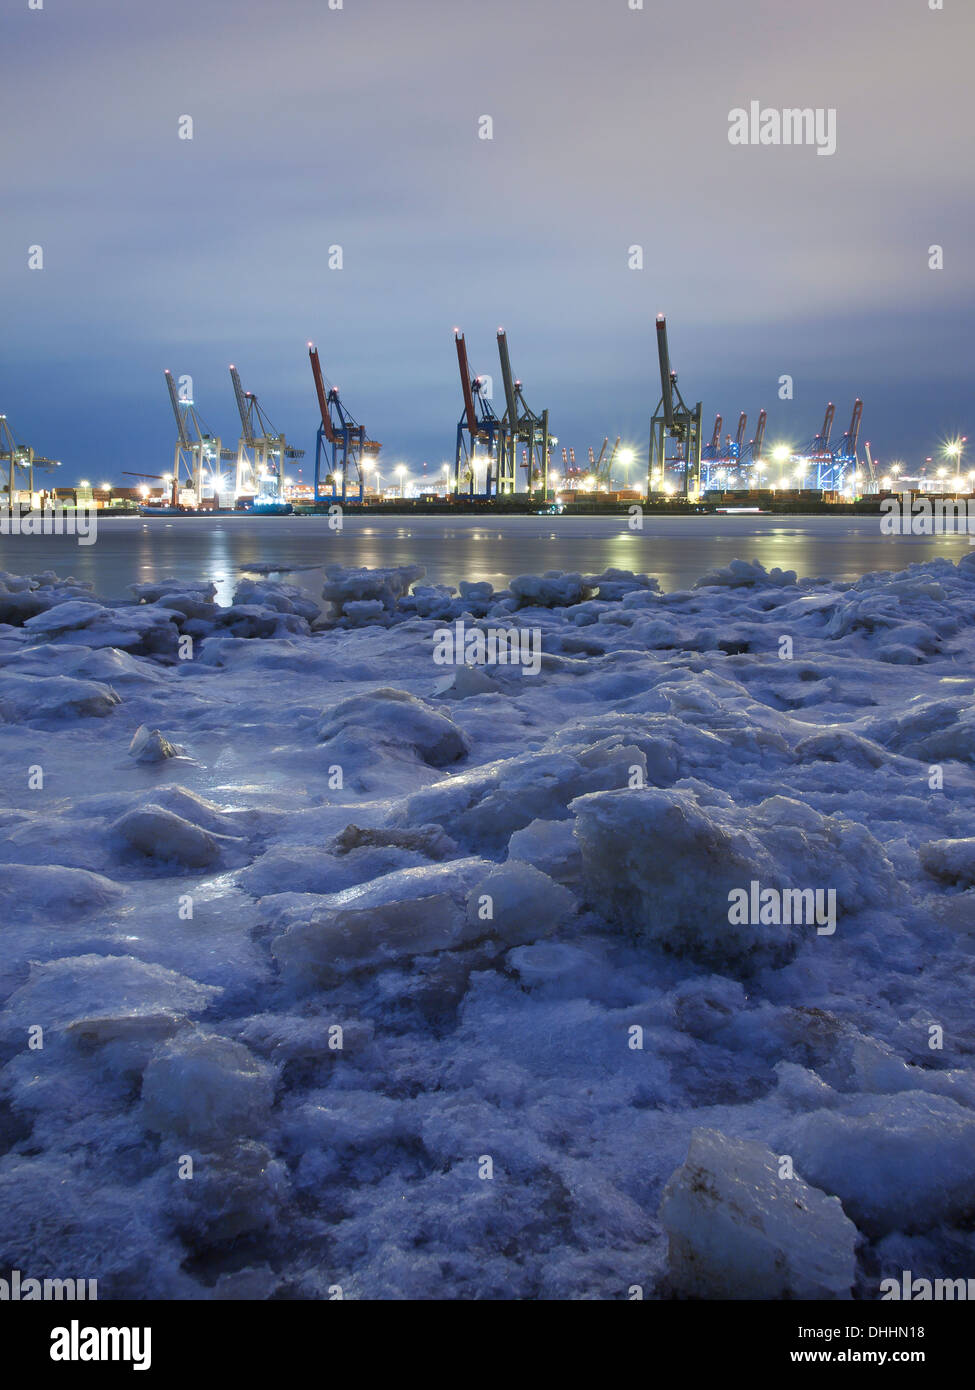 Frozen Elbe river with Waltershof container terminal in the evening, Hanseatic City of Hamburg, Germany, Europe Stock Photo